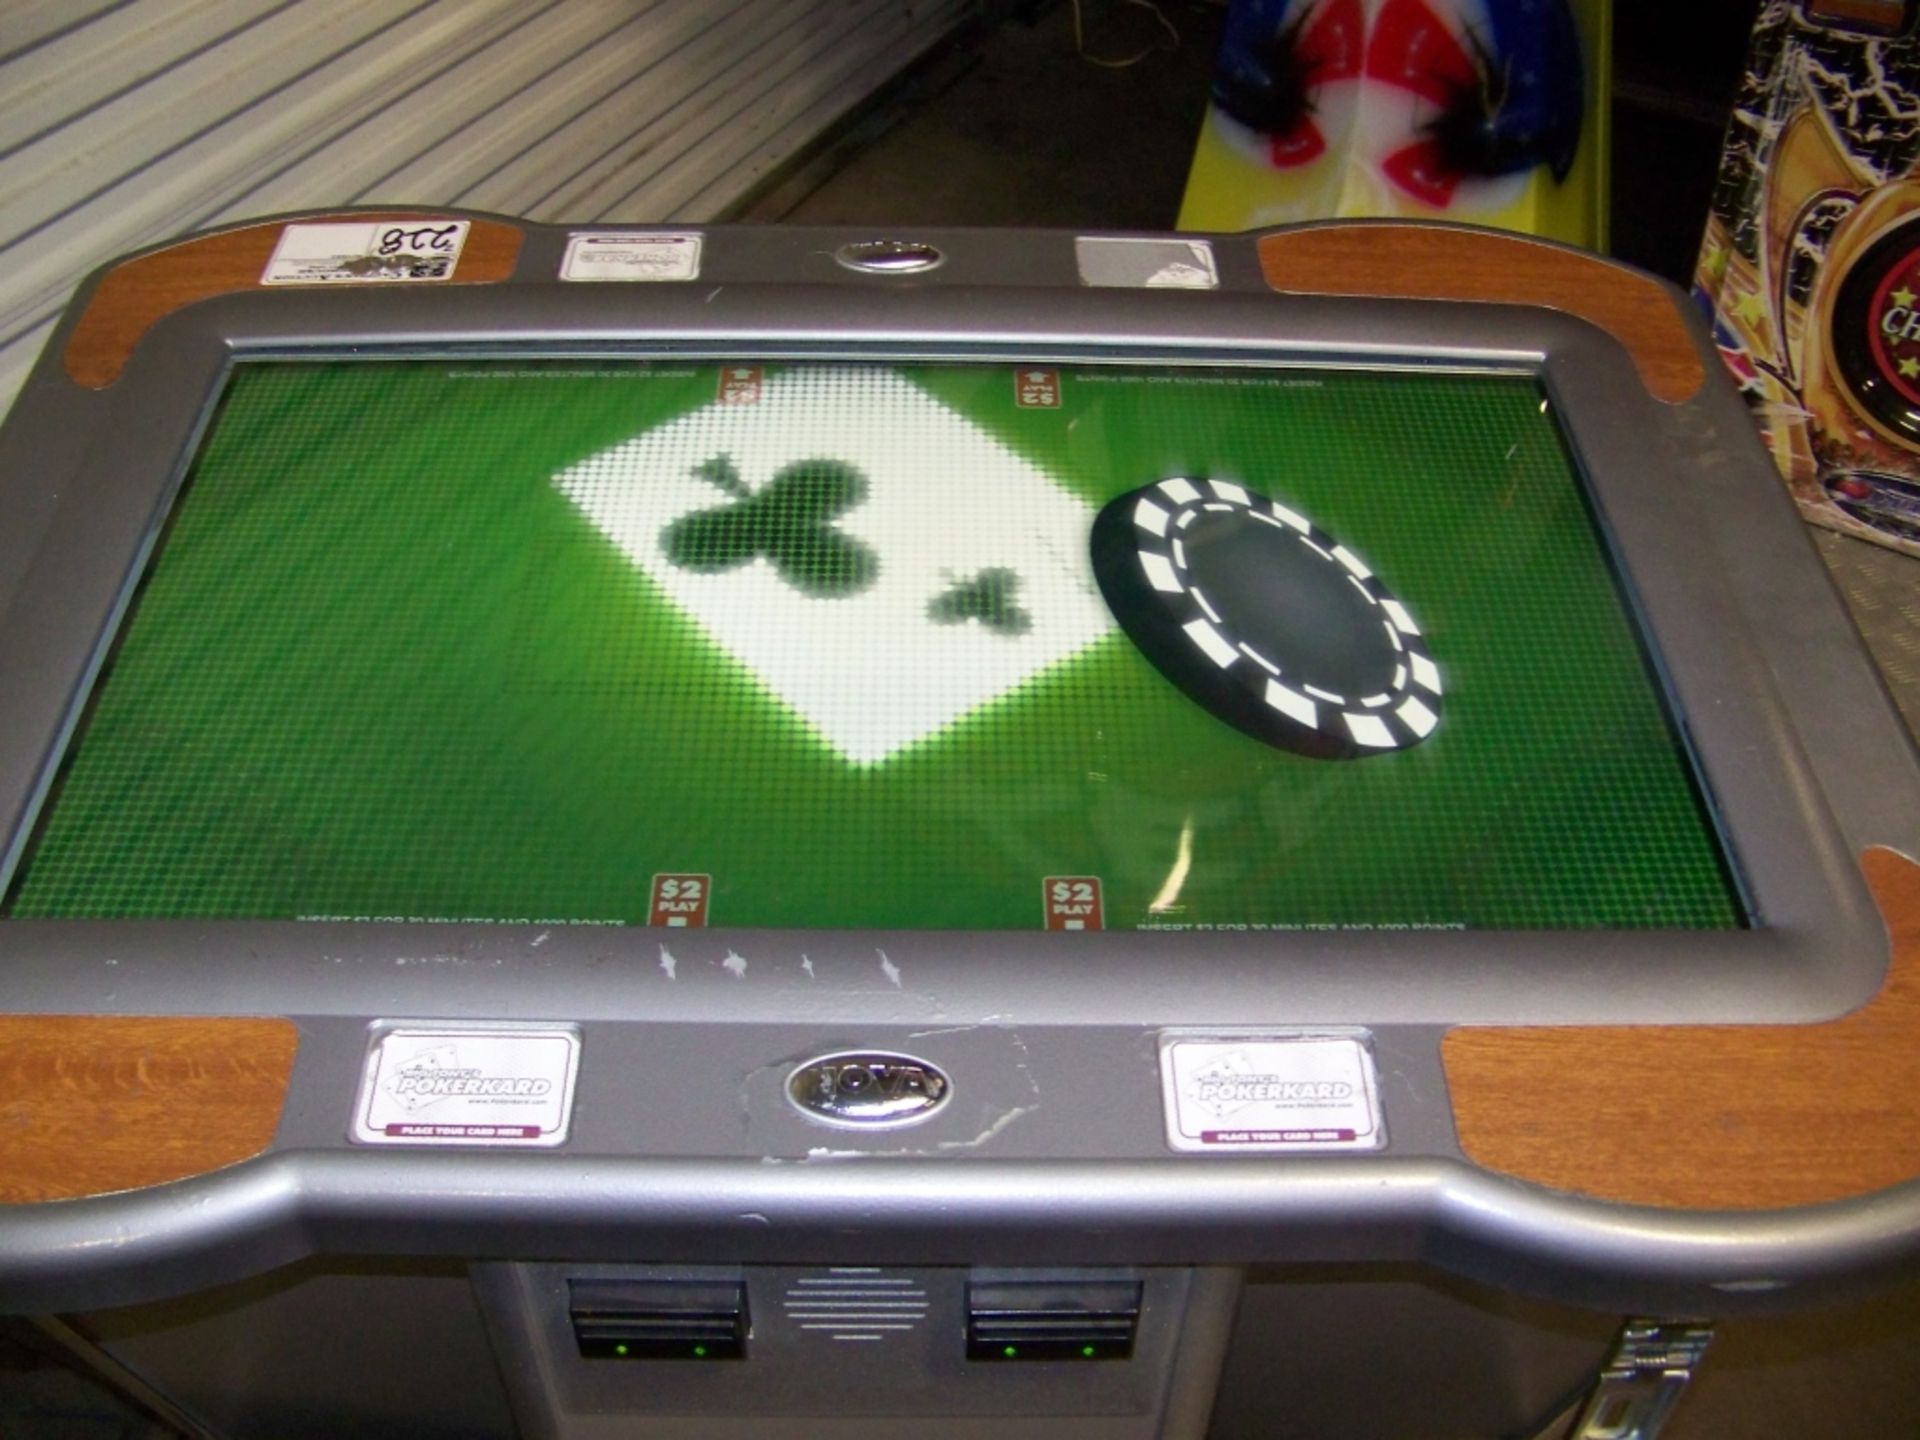 BIG TONY TEXAS HOLD'EM POKER ARCADE GAME Item is in used condition. Evidence of wear and - Image 7 of 10